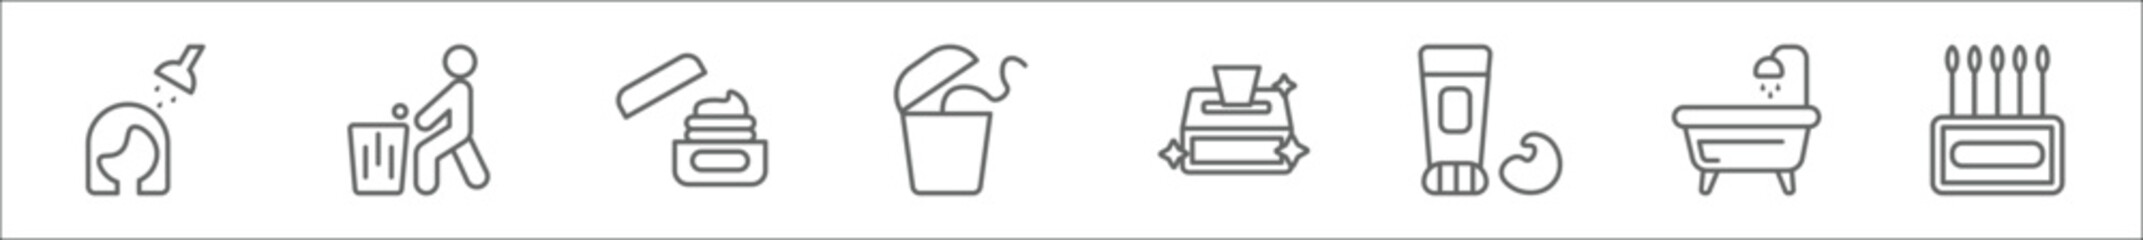 outline set of hygiene line icons. linear vector icons such as hair washing, throw, face cream, flossing, sanitary napkin, shaving gel, bathroom, ear buds